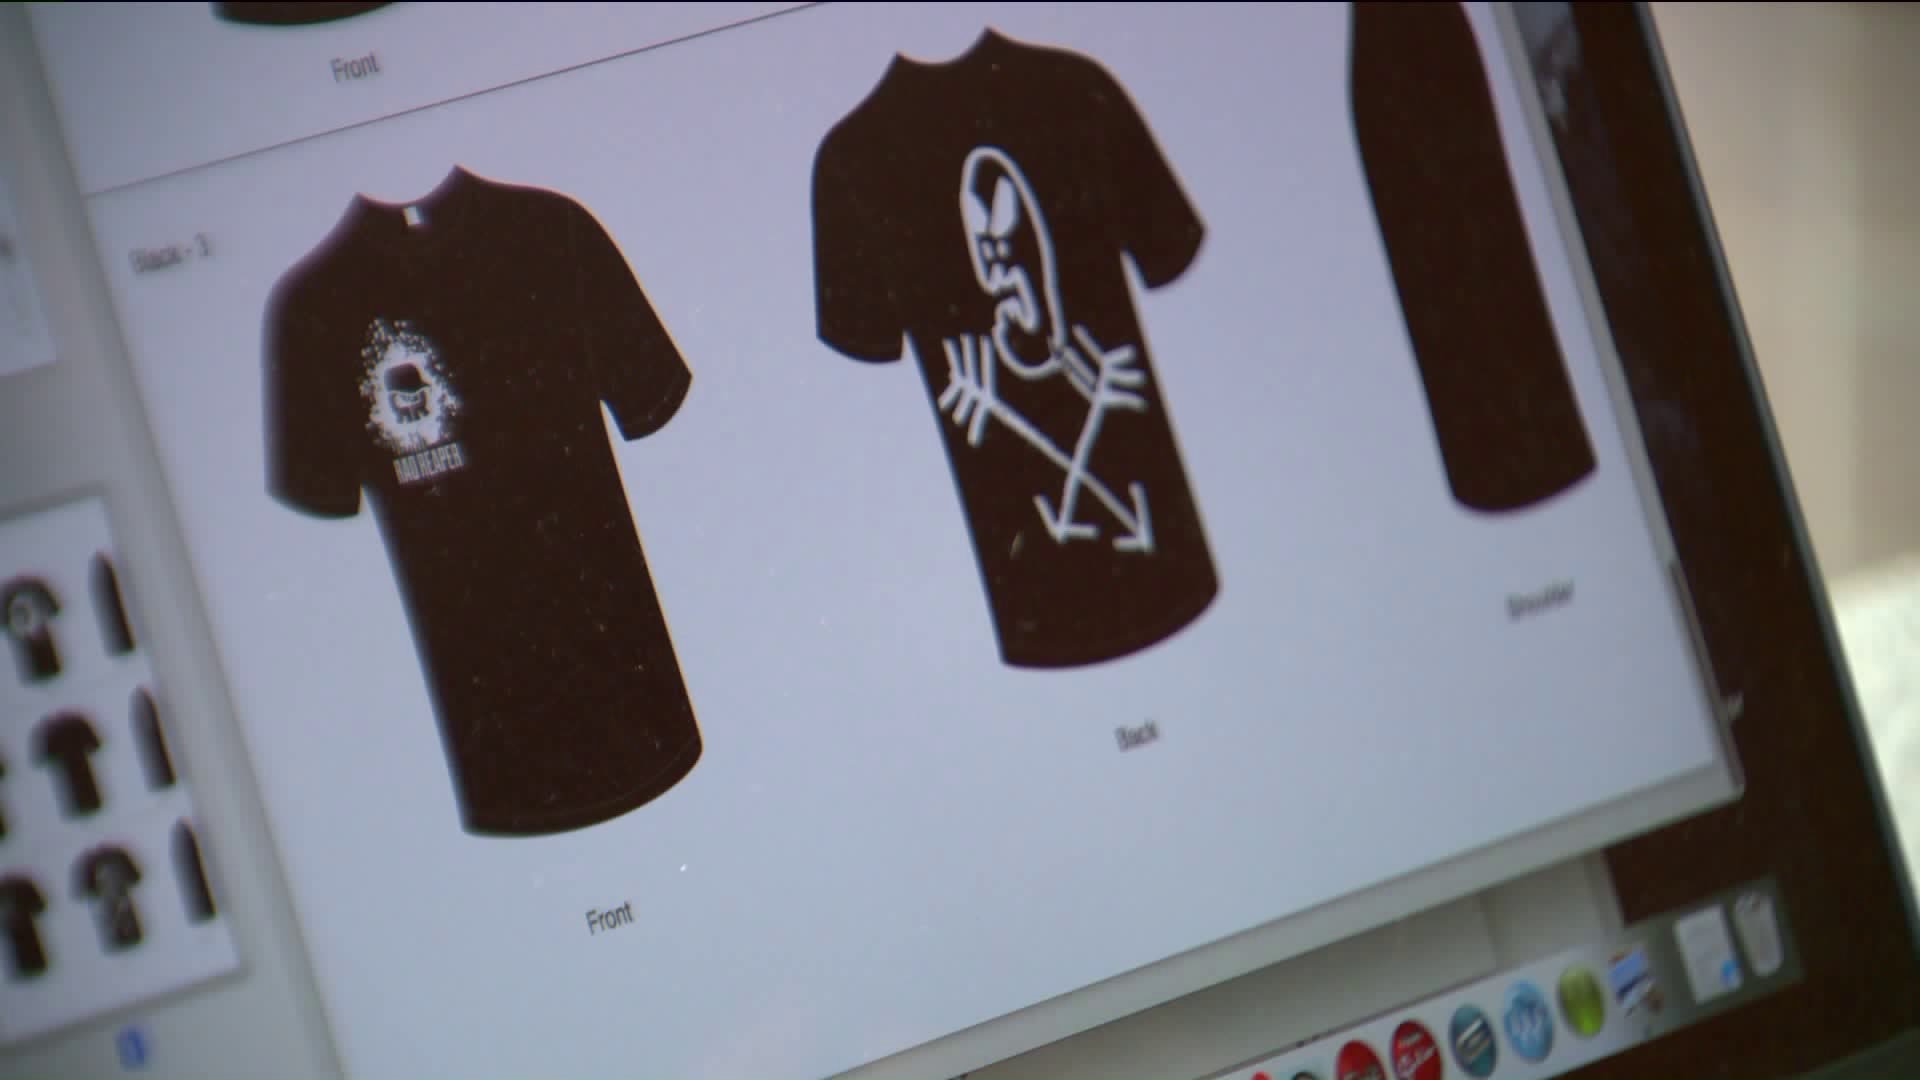 One young entrepreneur in Southington starts her own tee shirt company